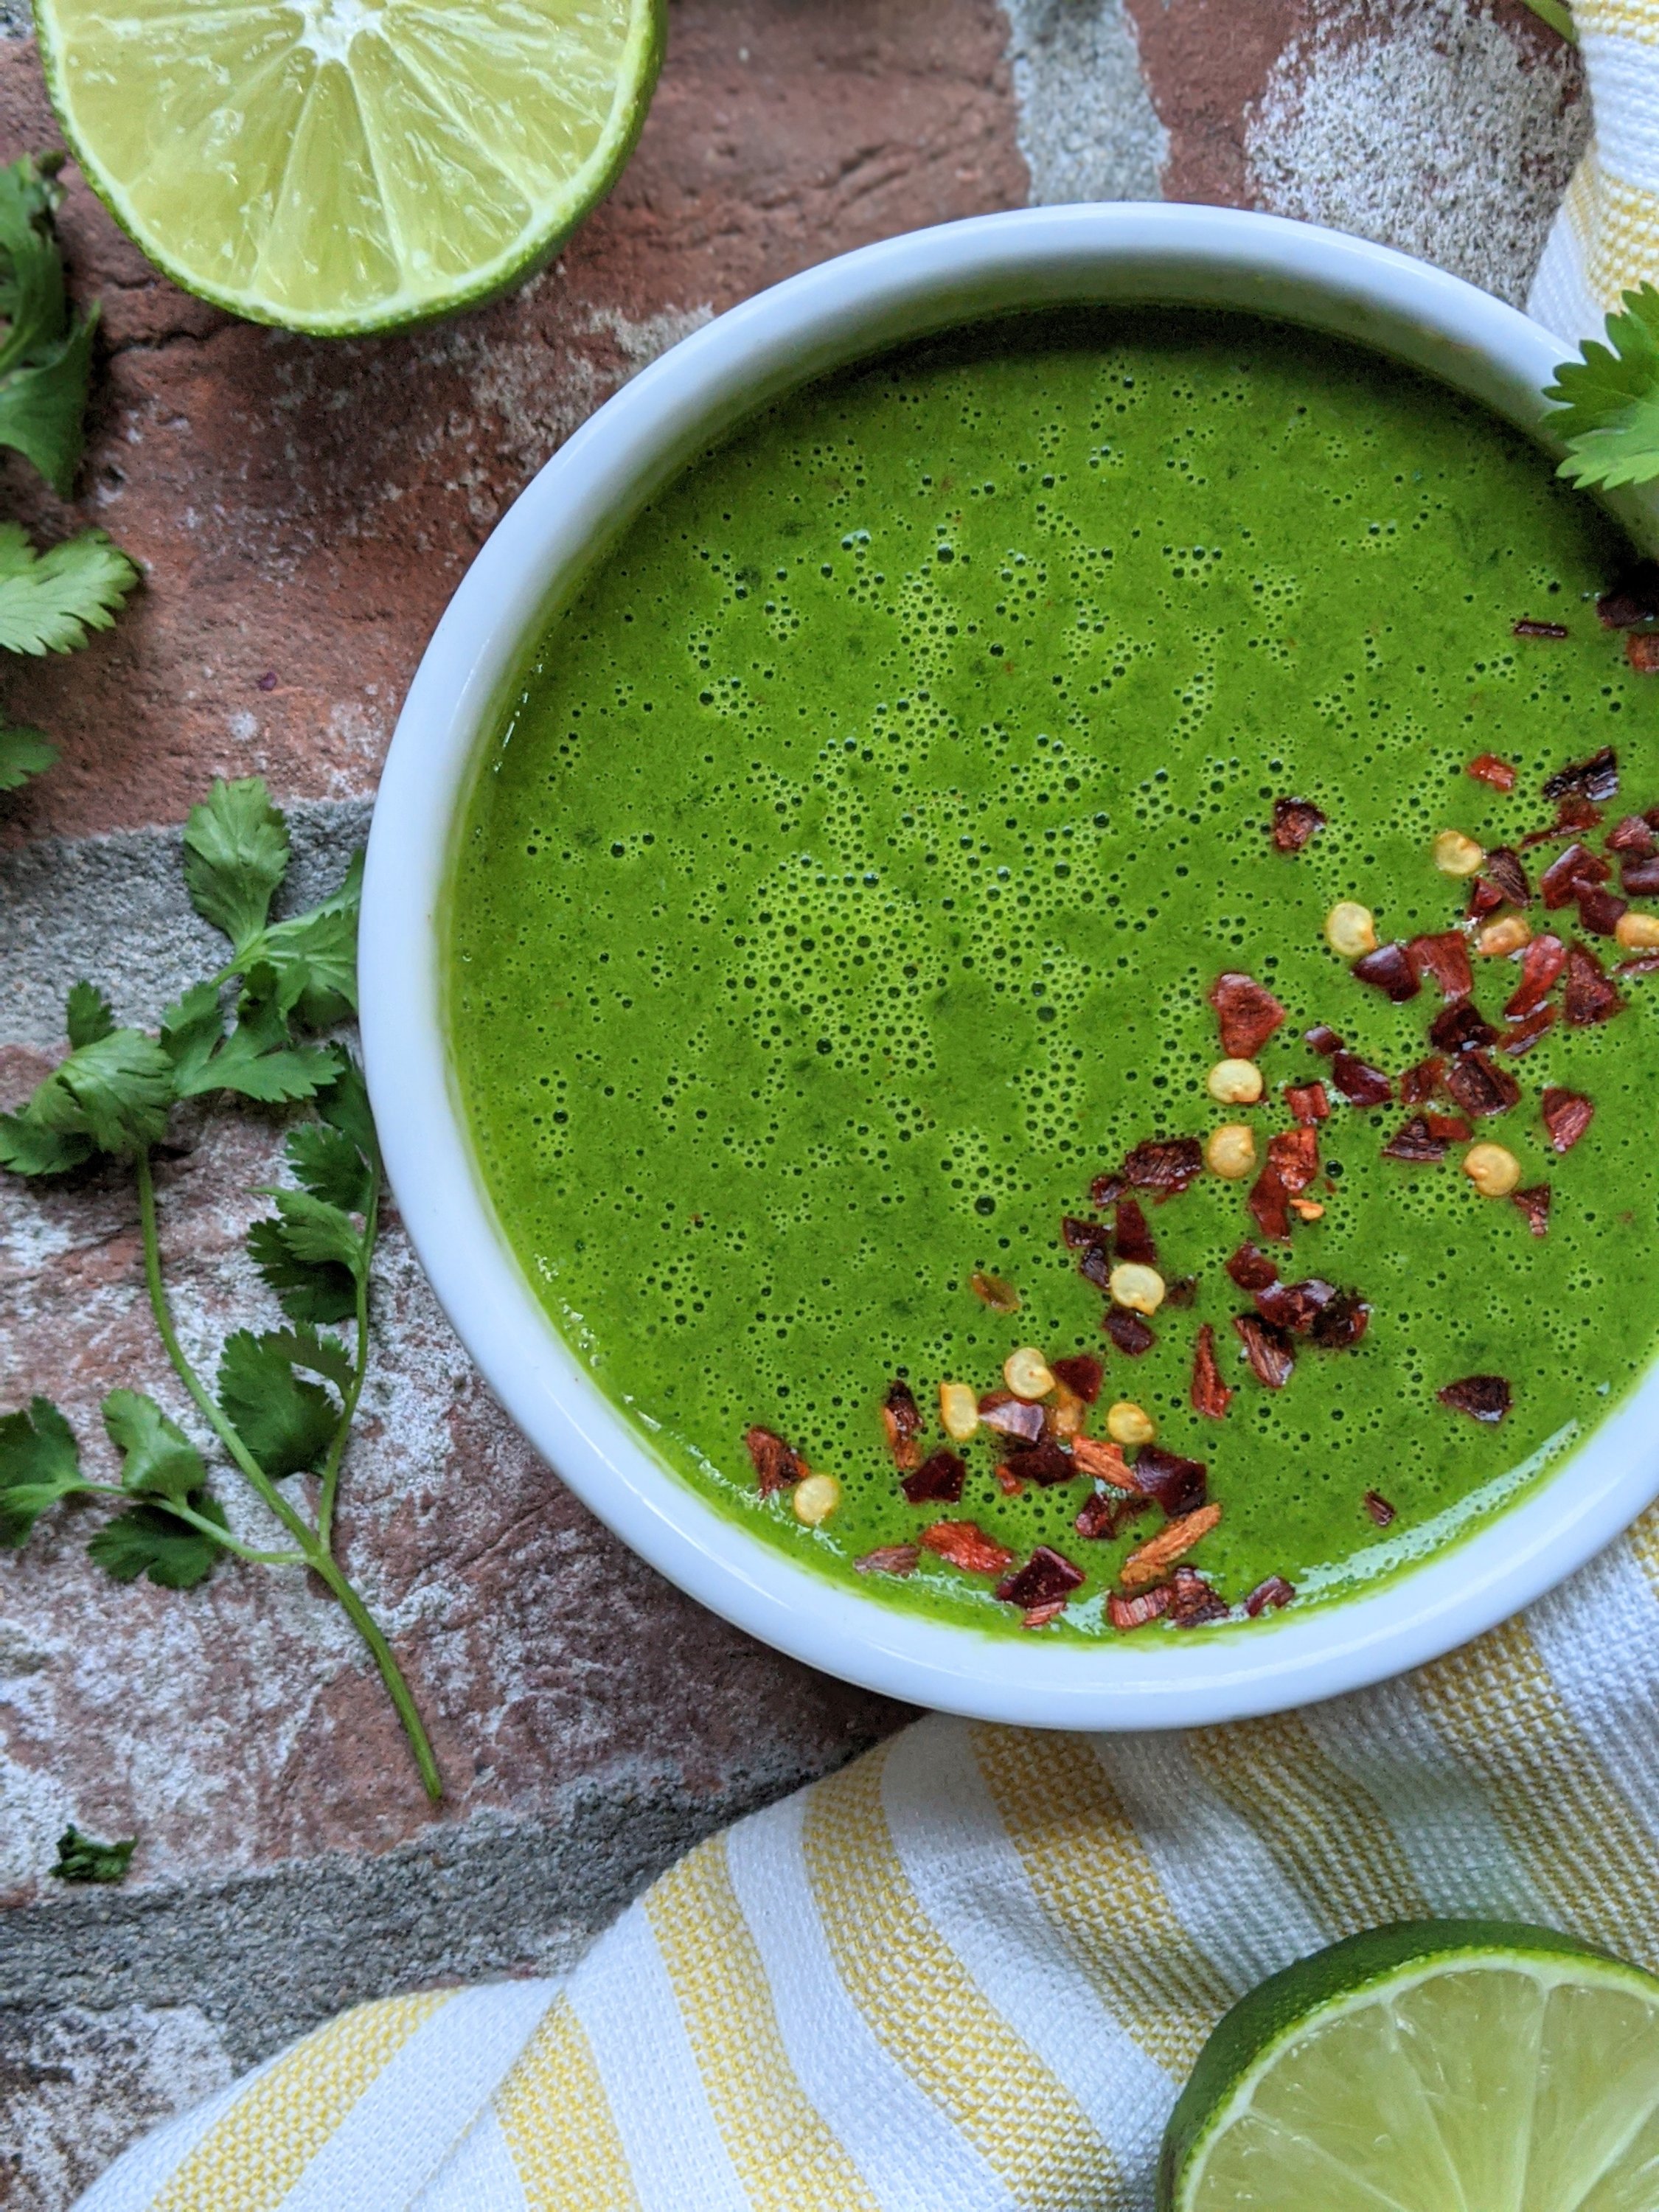 recipes with cilantro stems sauces save cilantro stem or freeze blend for no waste recipes to use kitchen scraps